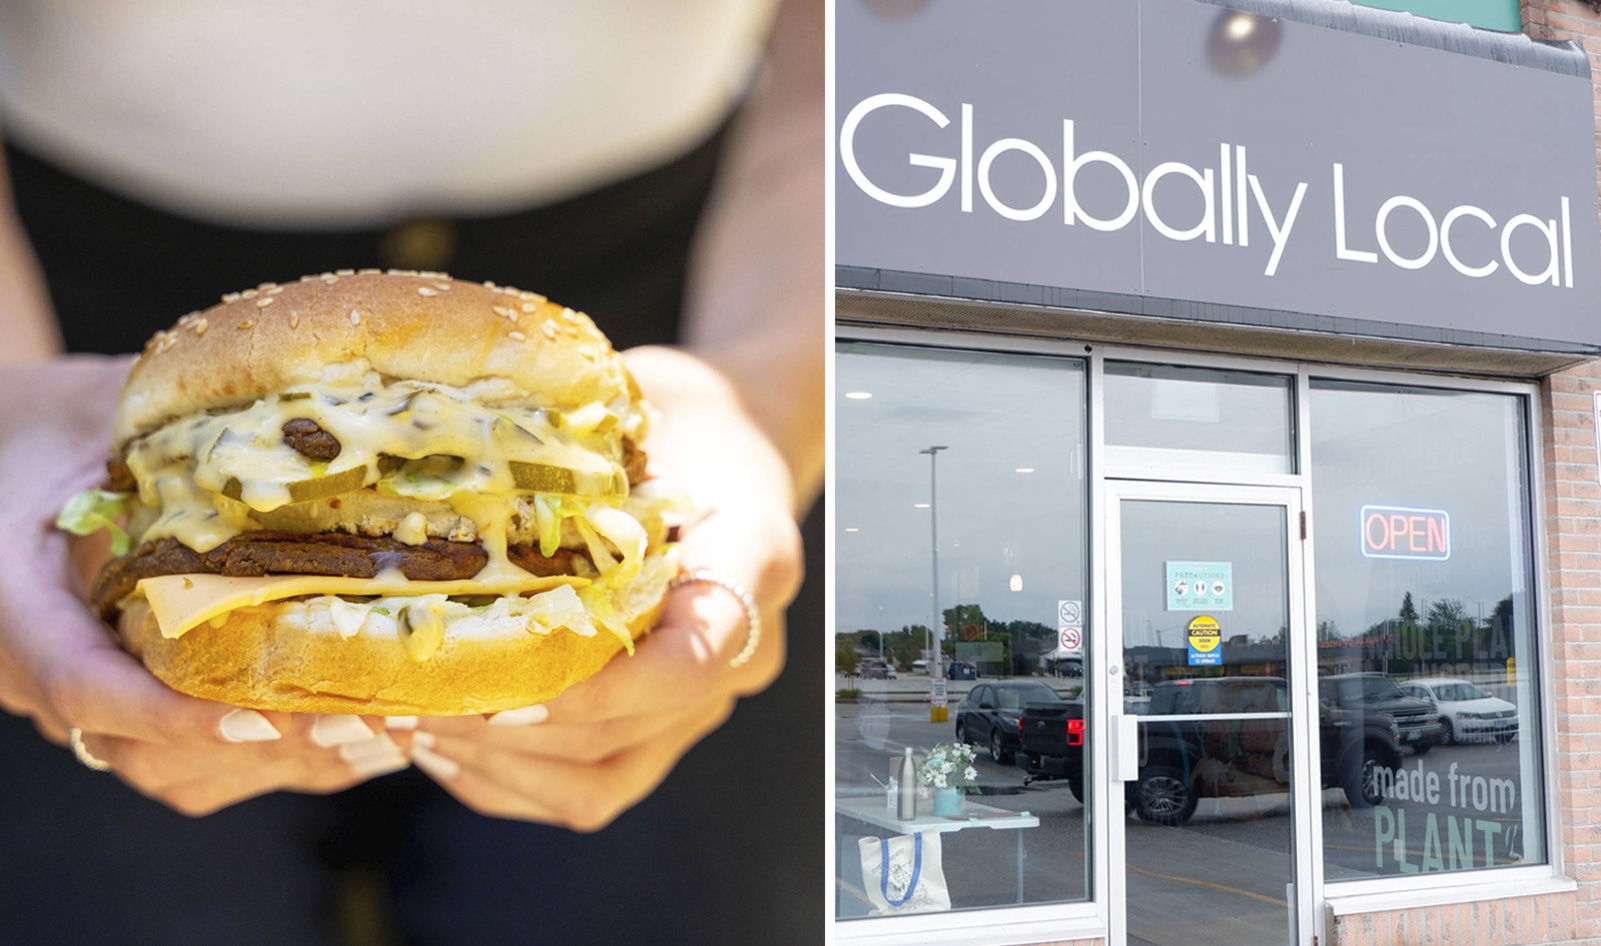 Canada’s Globally Local Becomes World’s First Vegan Fast-Food Chain to Go Public